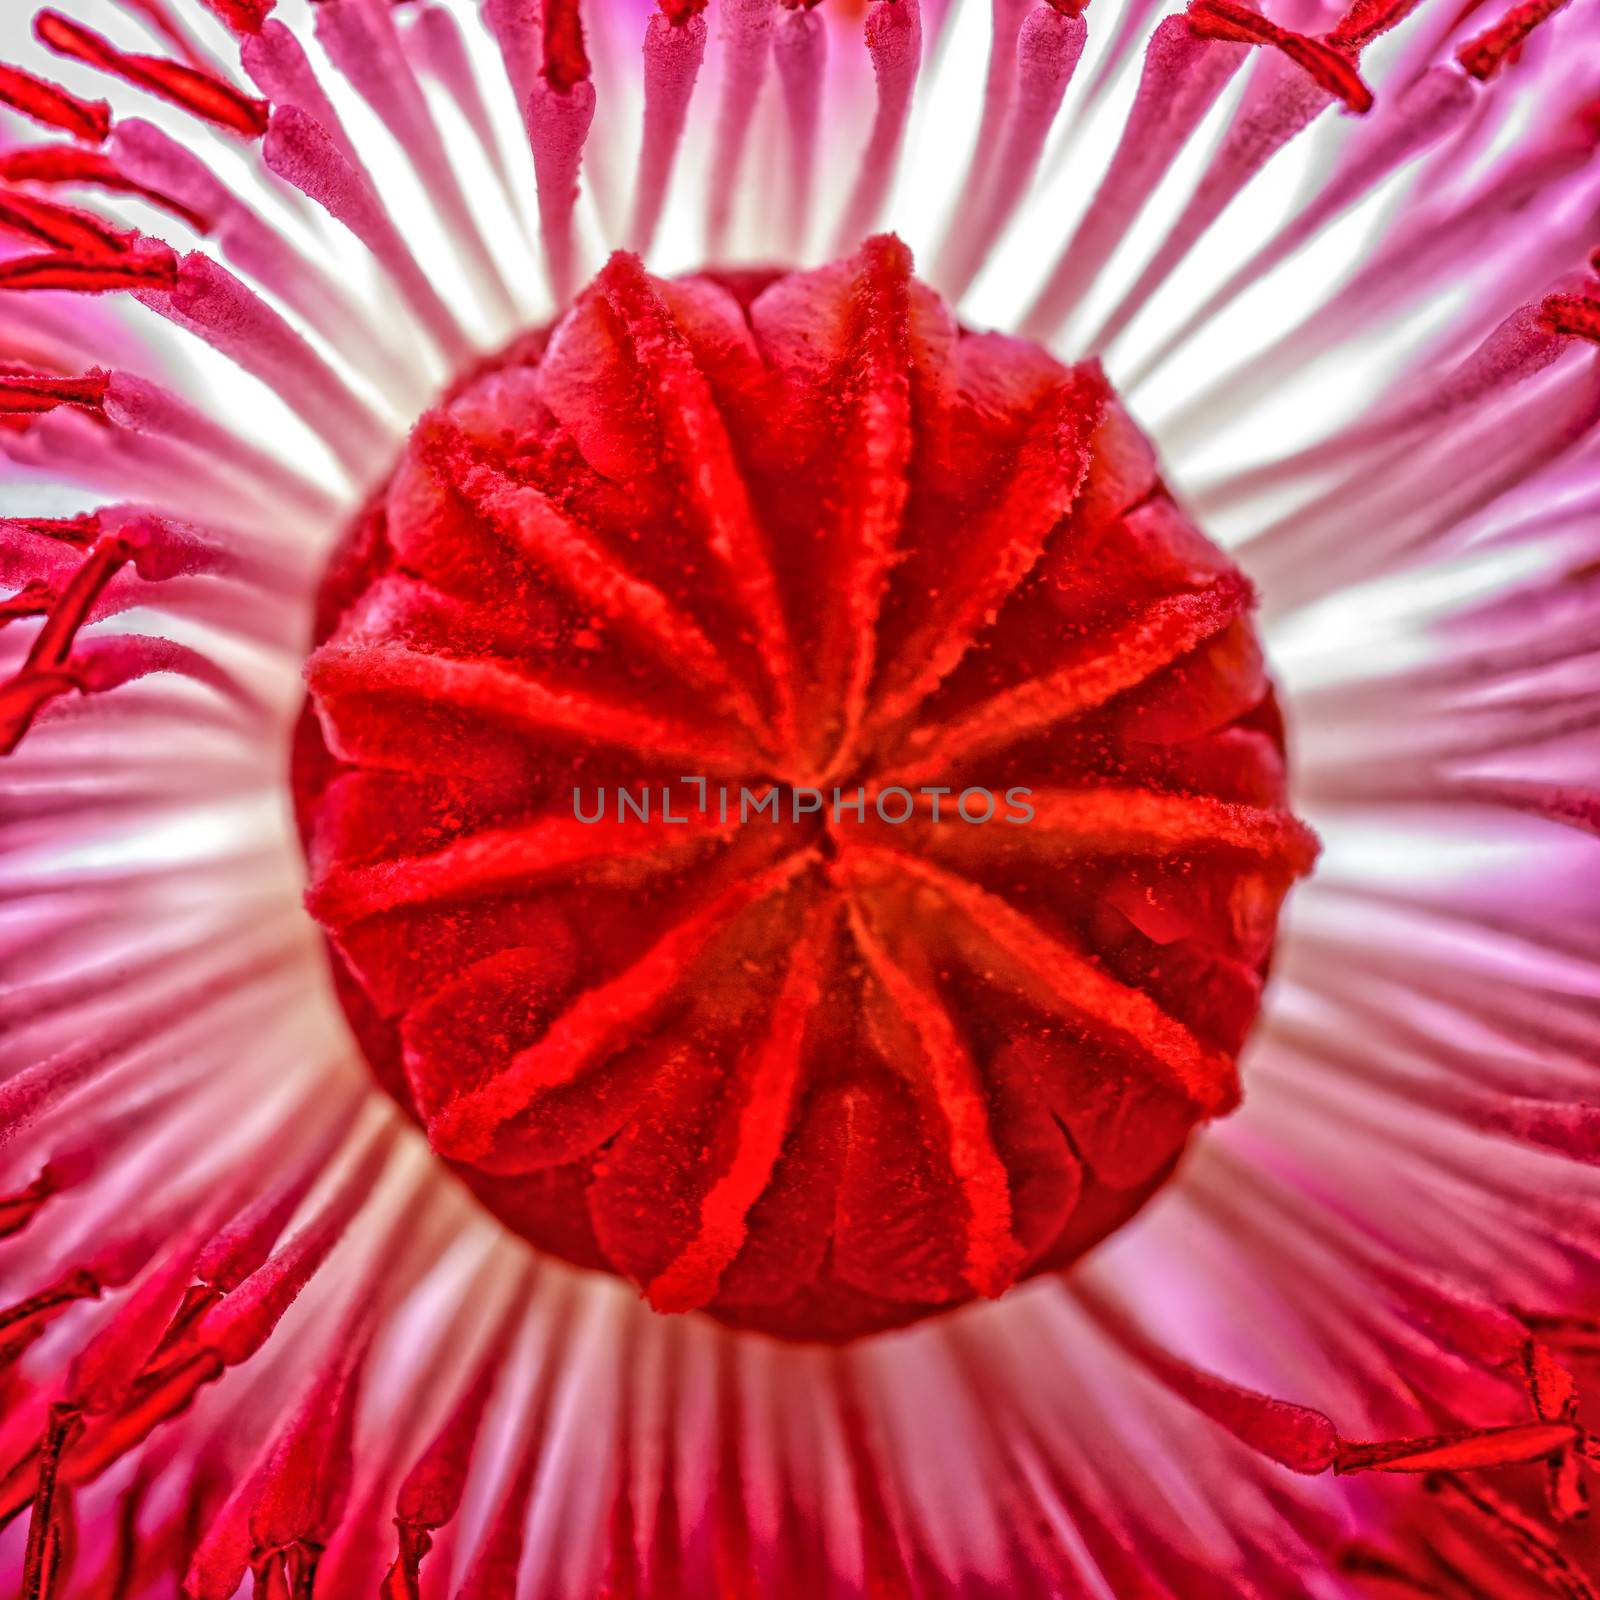 The heart of the Poppy flower, the seed capsule, surrounded by a plethora of stamens.